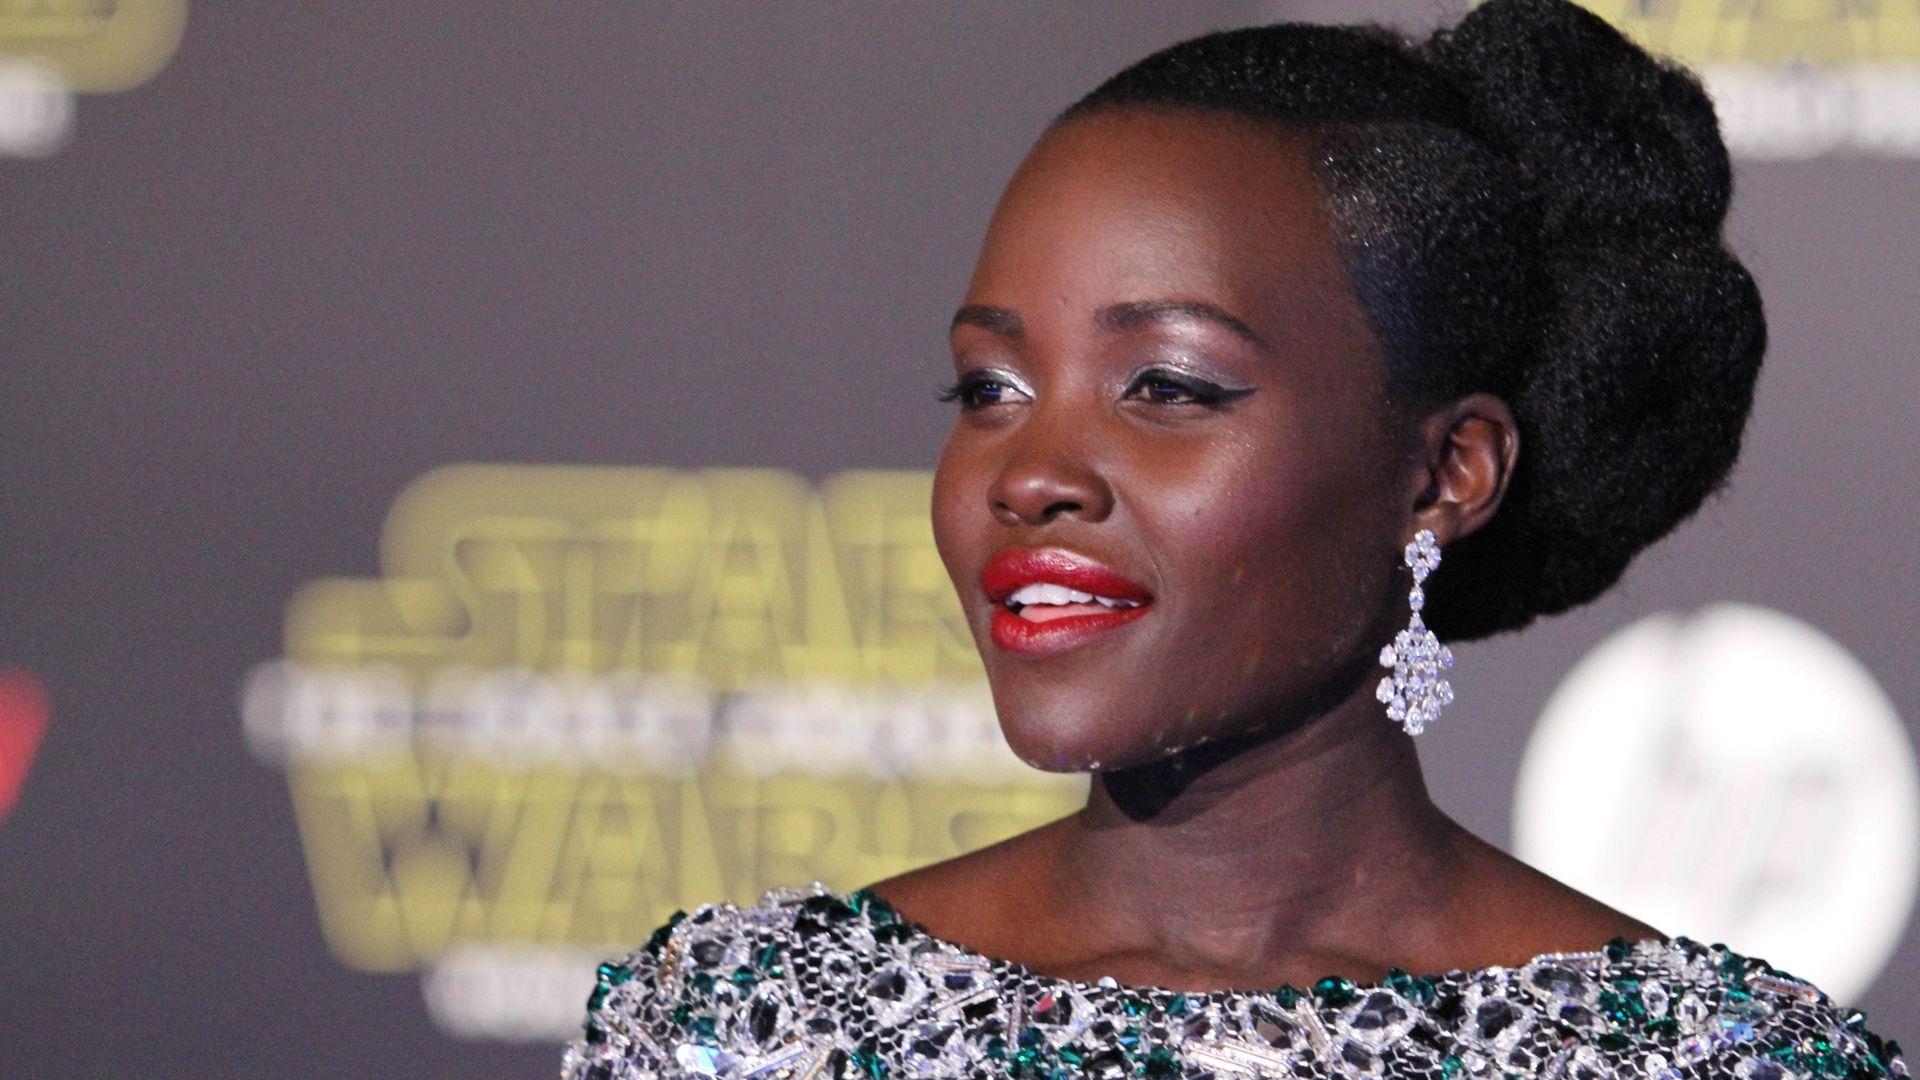 This amazing freestyle just might get Lupita Nyong'o a record deal